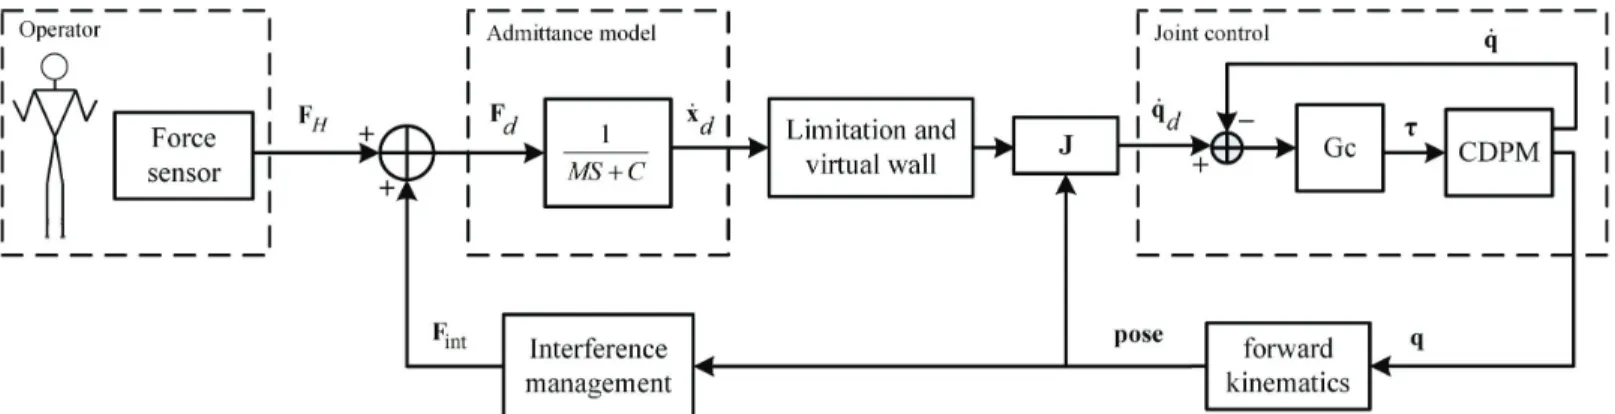 Figure 5: Control scheme for physical interaction with interference management.